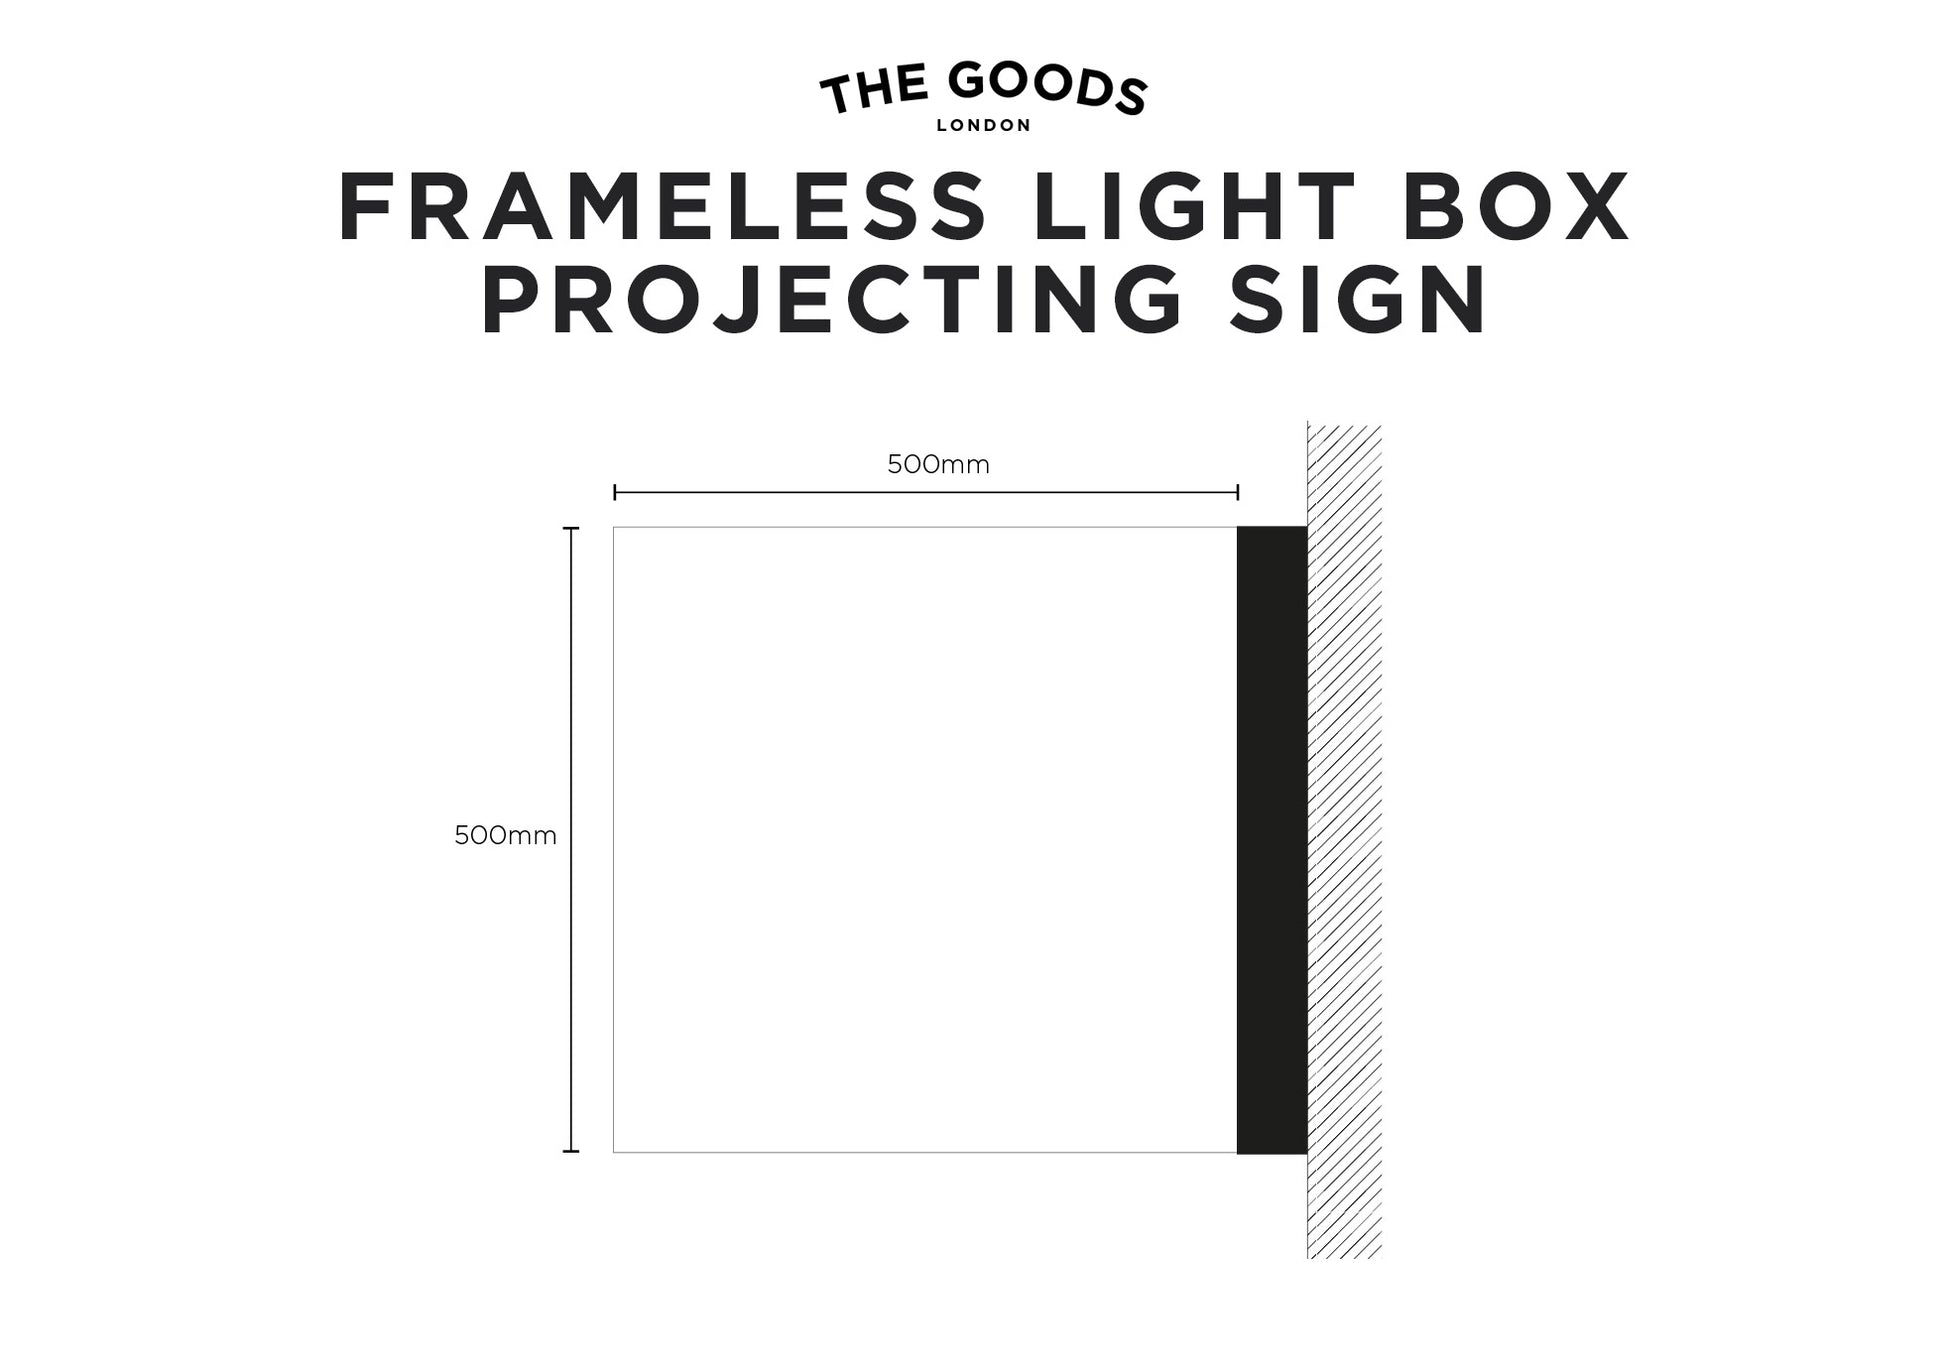 Frameless Projecting Sign Technical Drawing